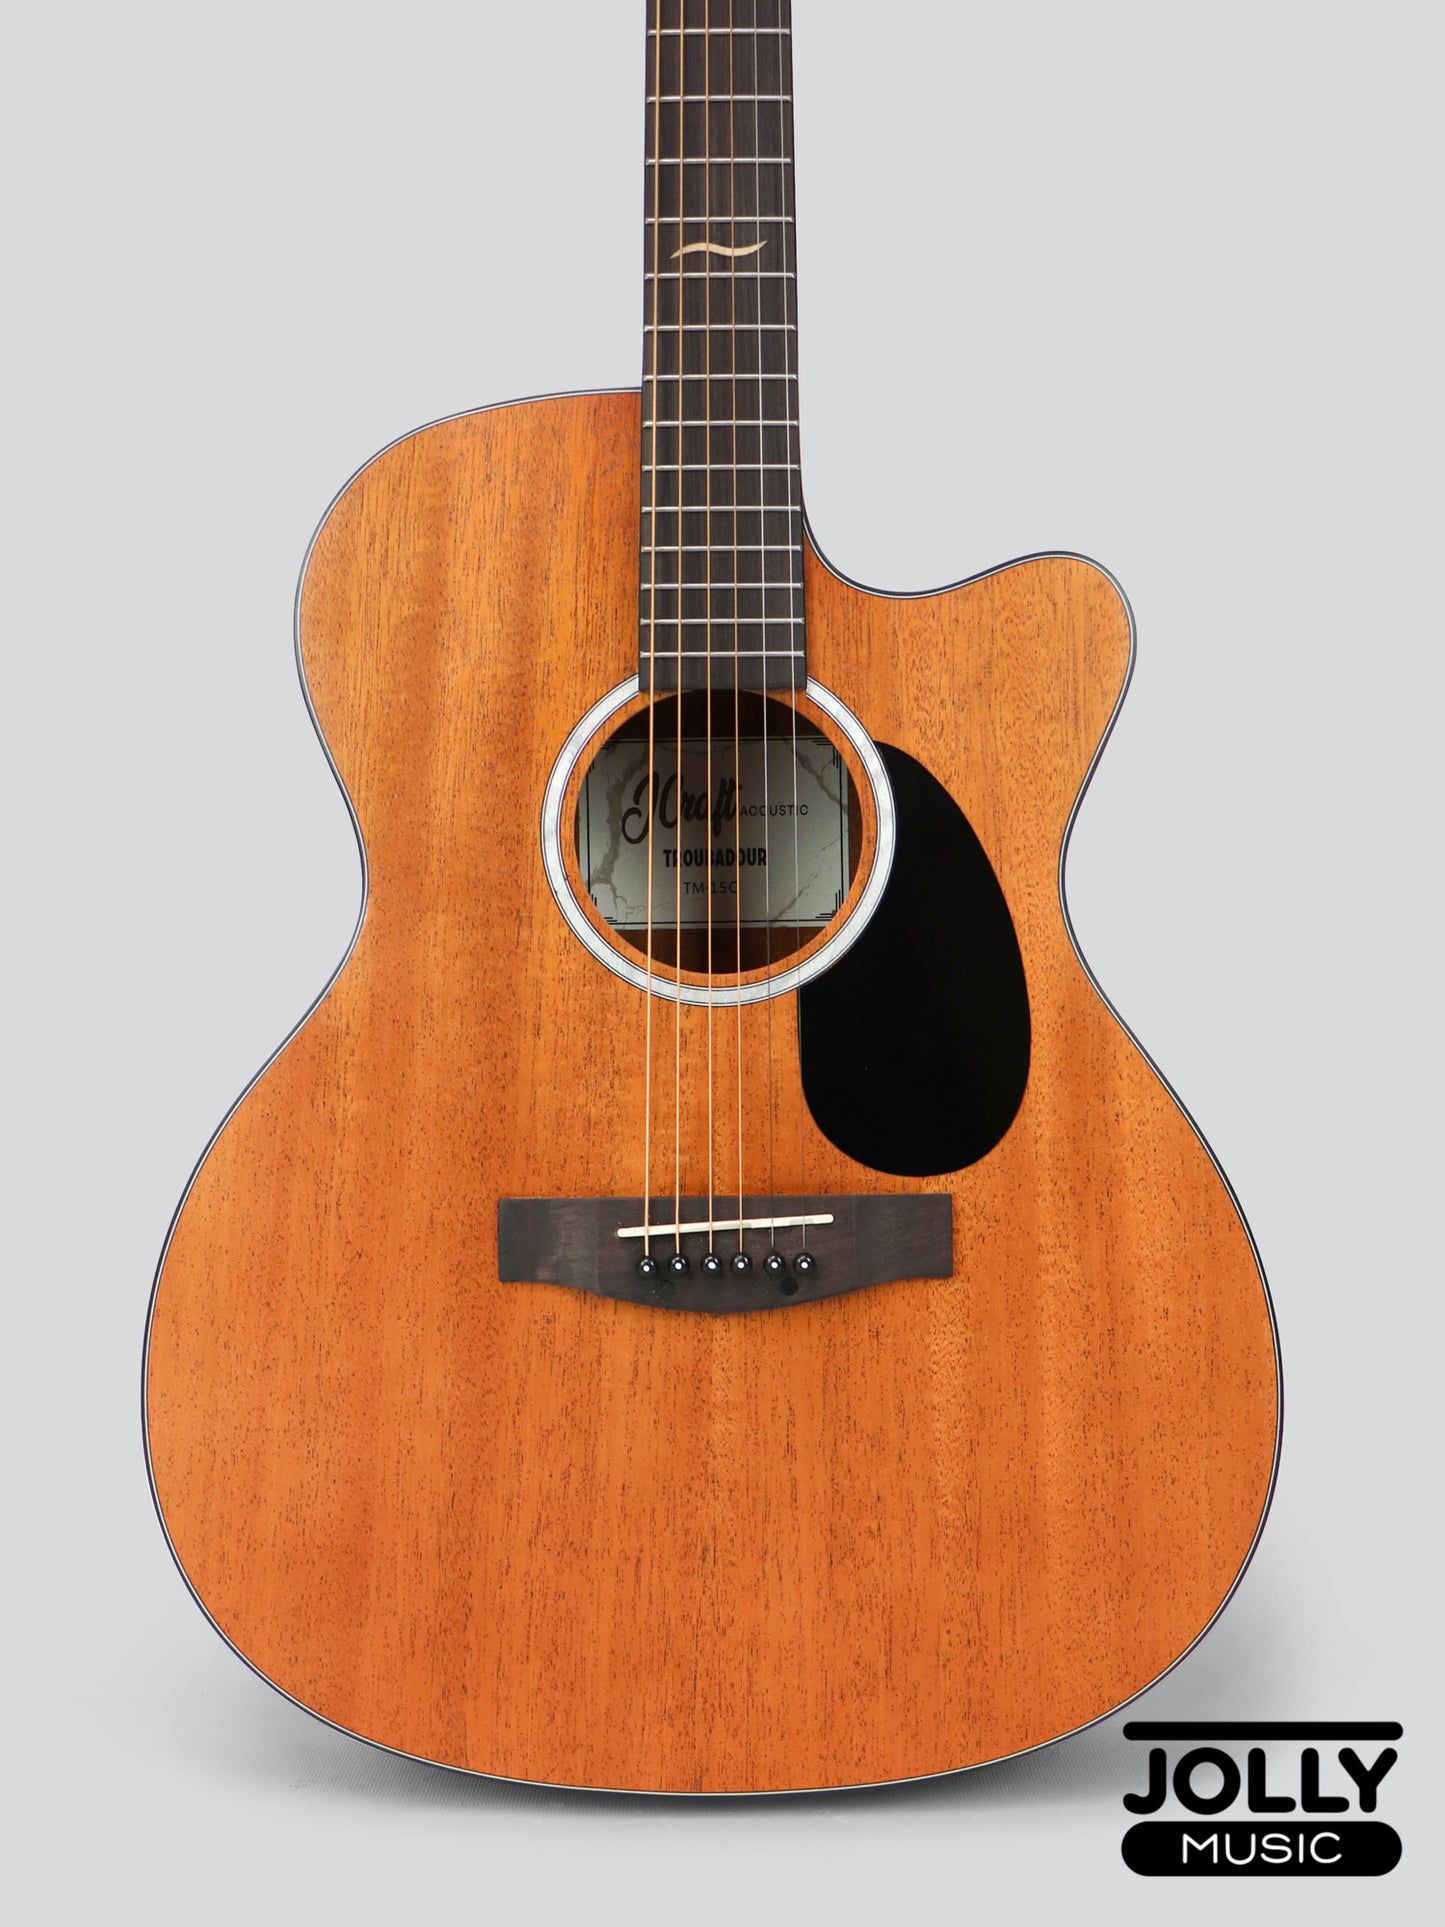 J-Craft Troubadour TM-15C All-Mahogany Orchestra Cutaway Acoustic Guitar with soft case